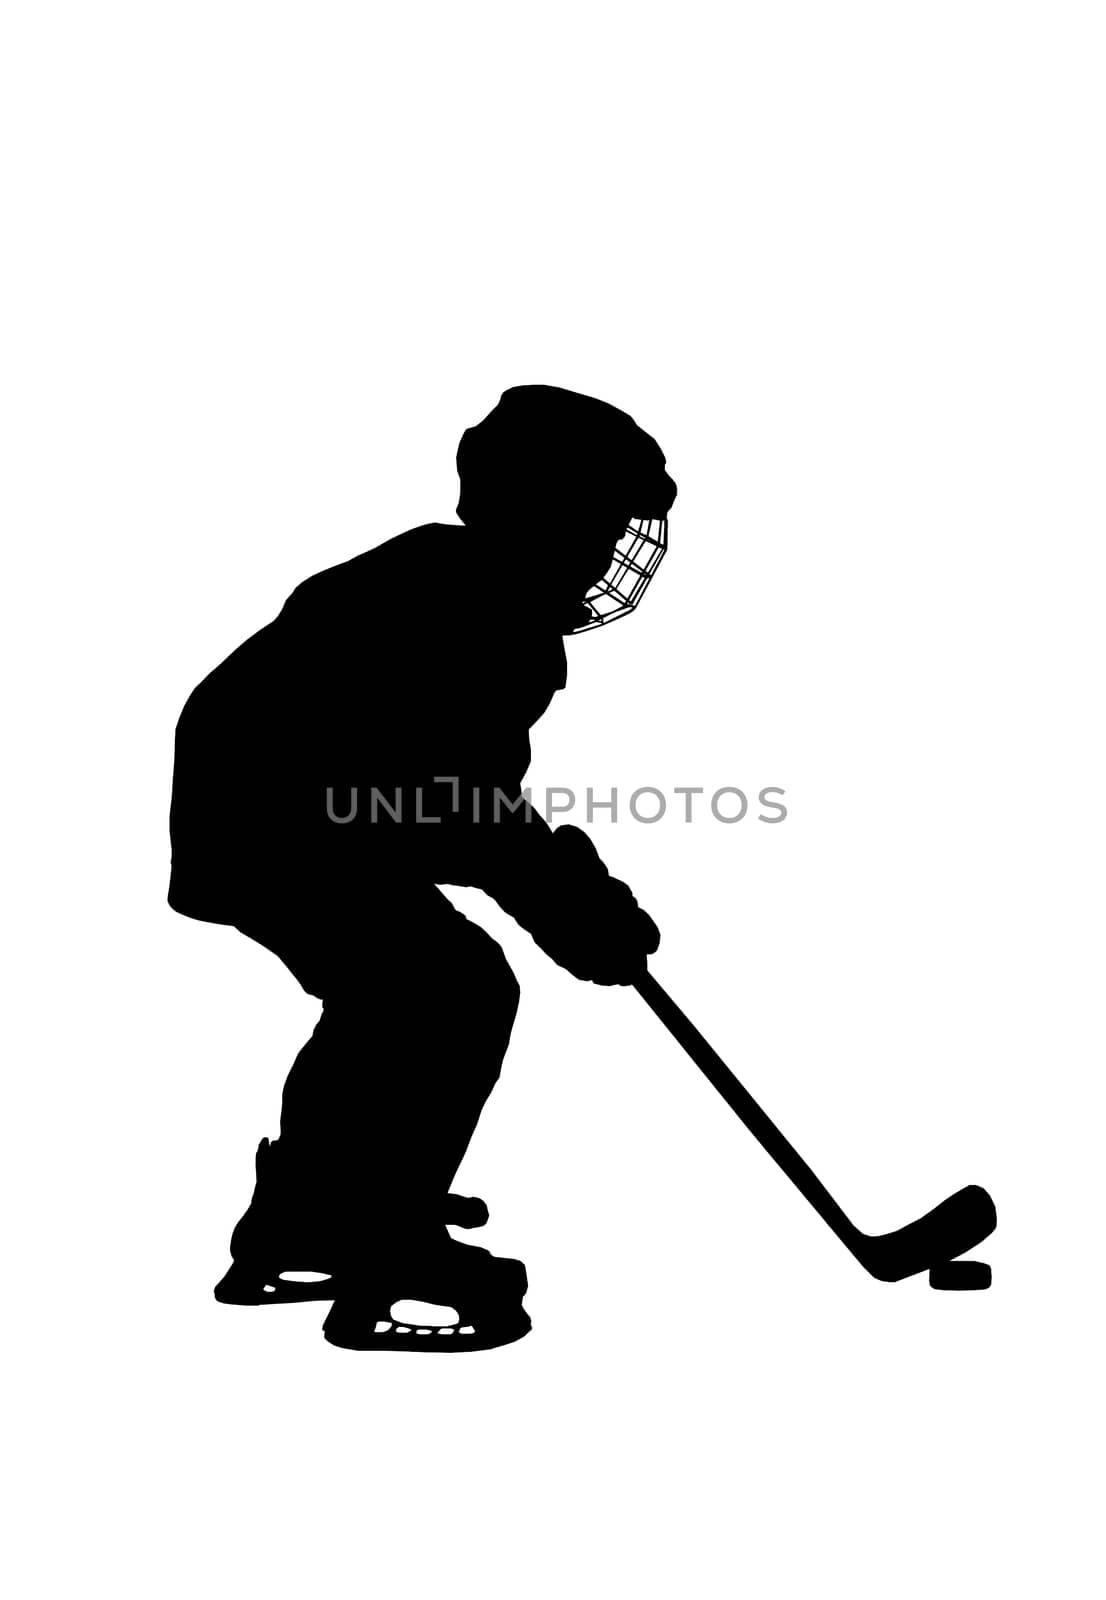 Silhouette of a hockey player, isolated on white background.